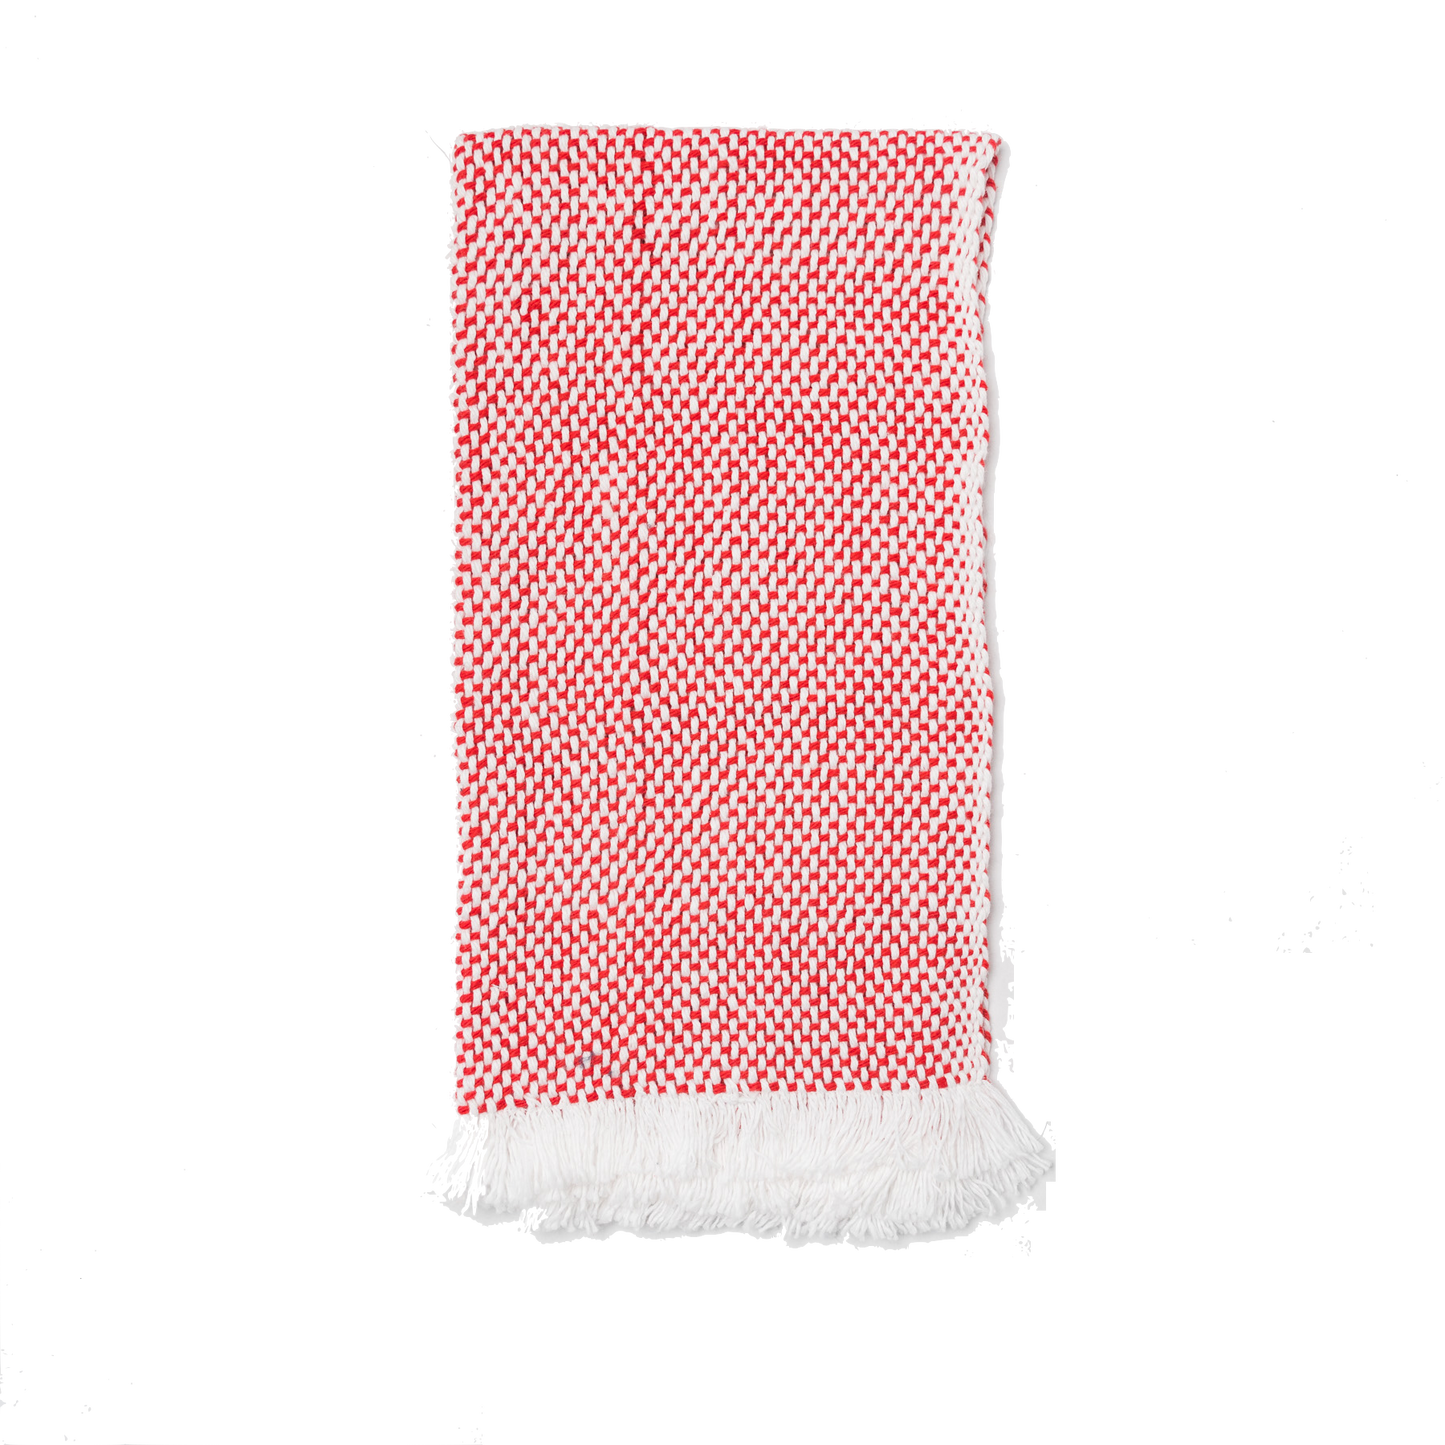 Folded white and red hand towel